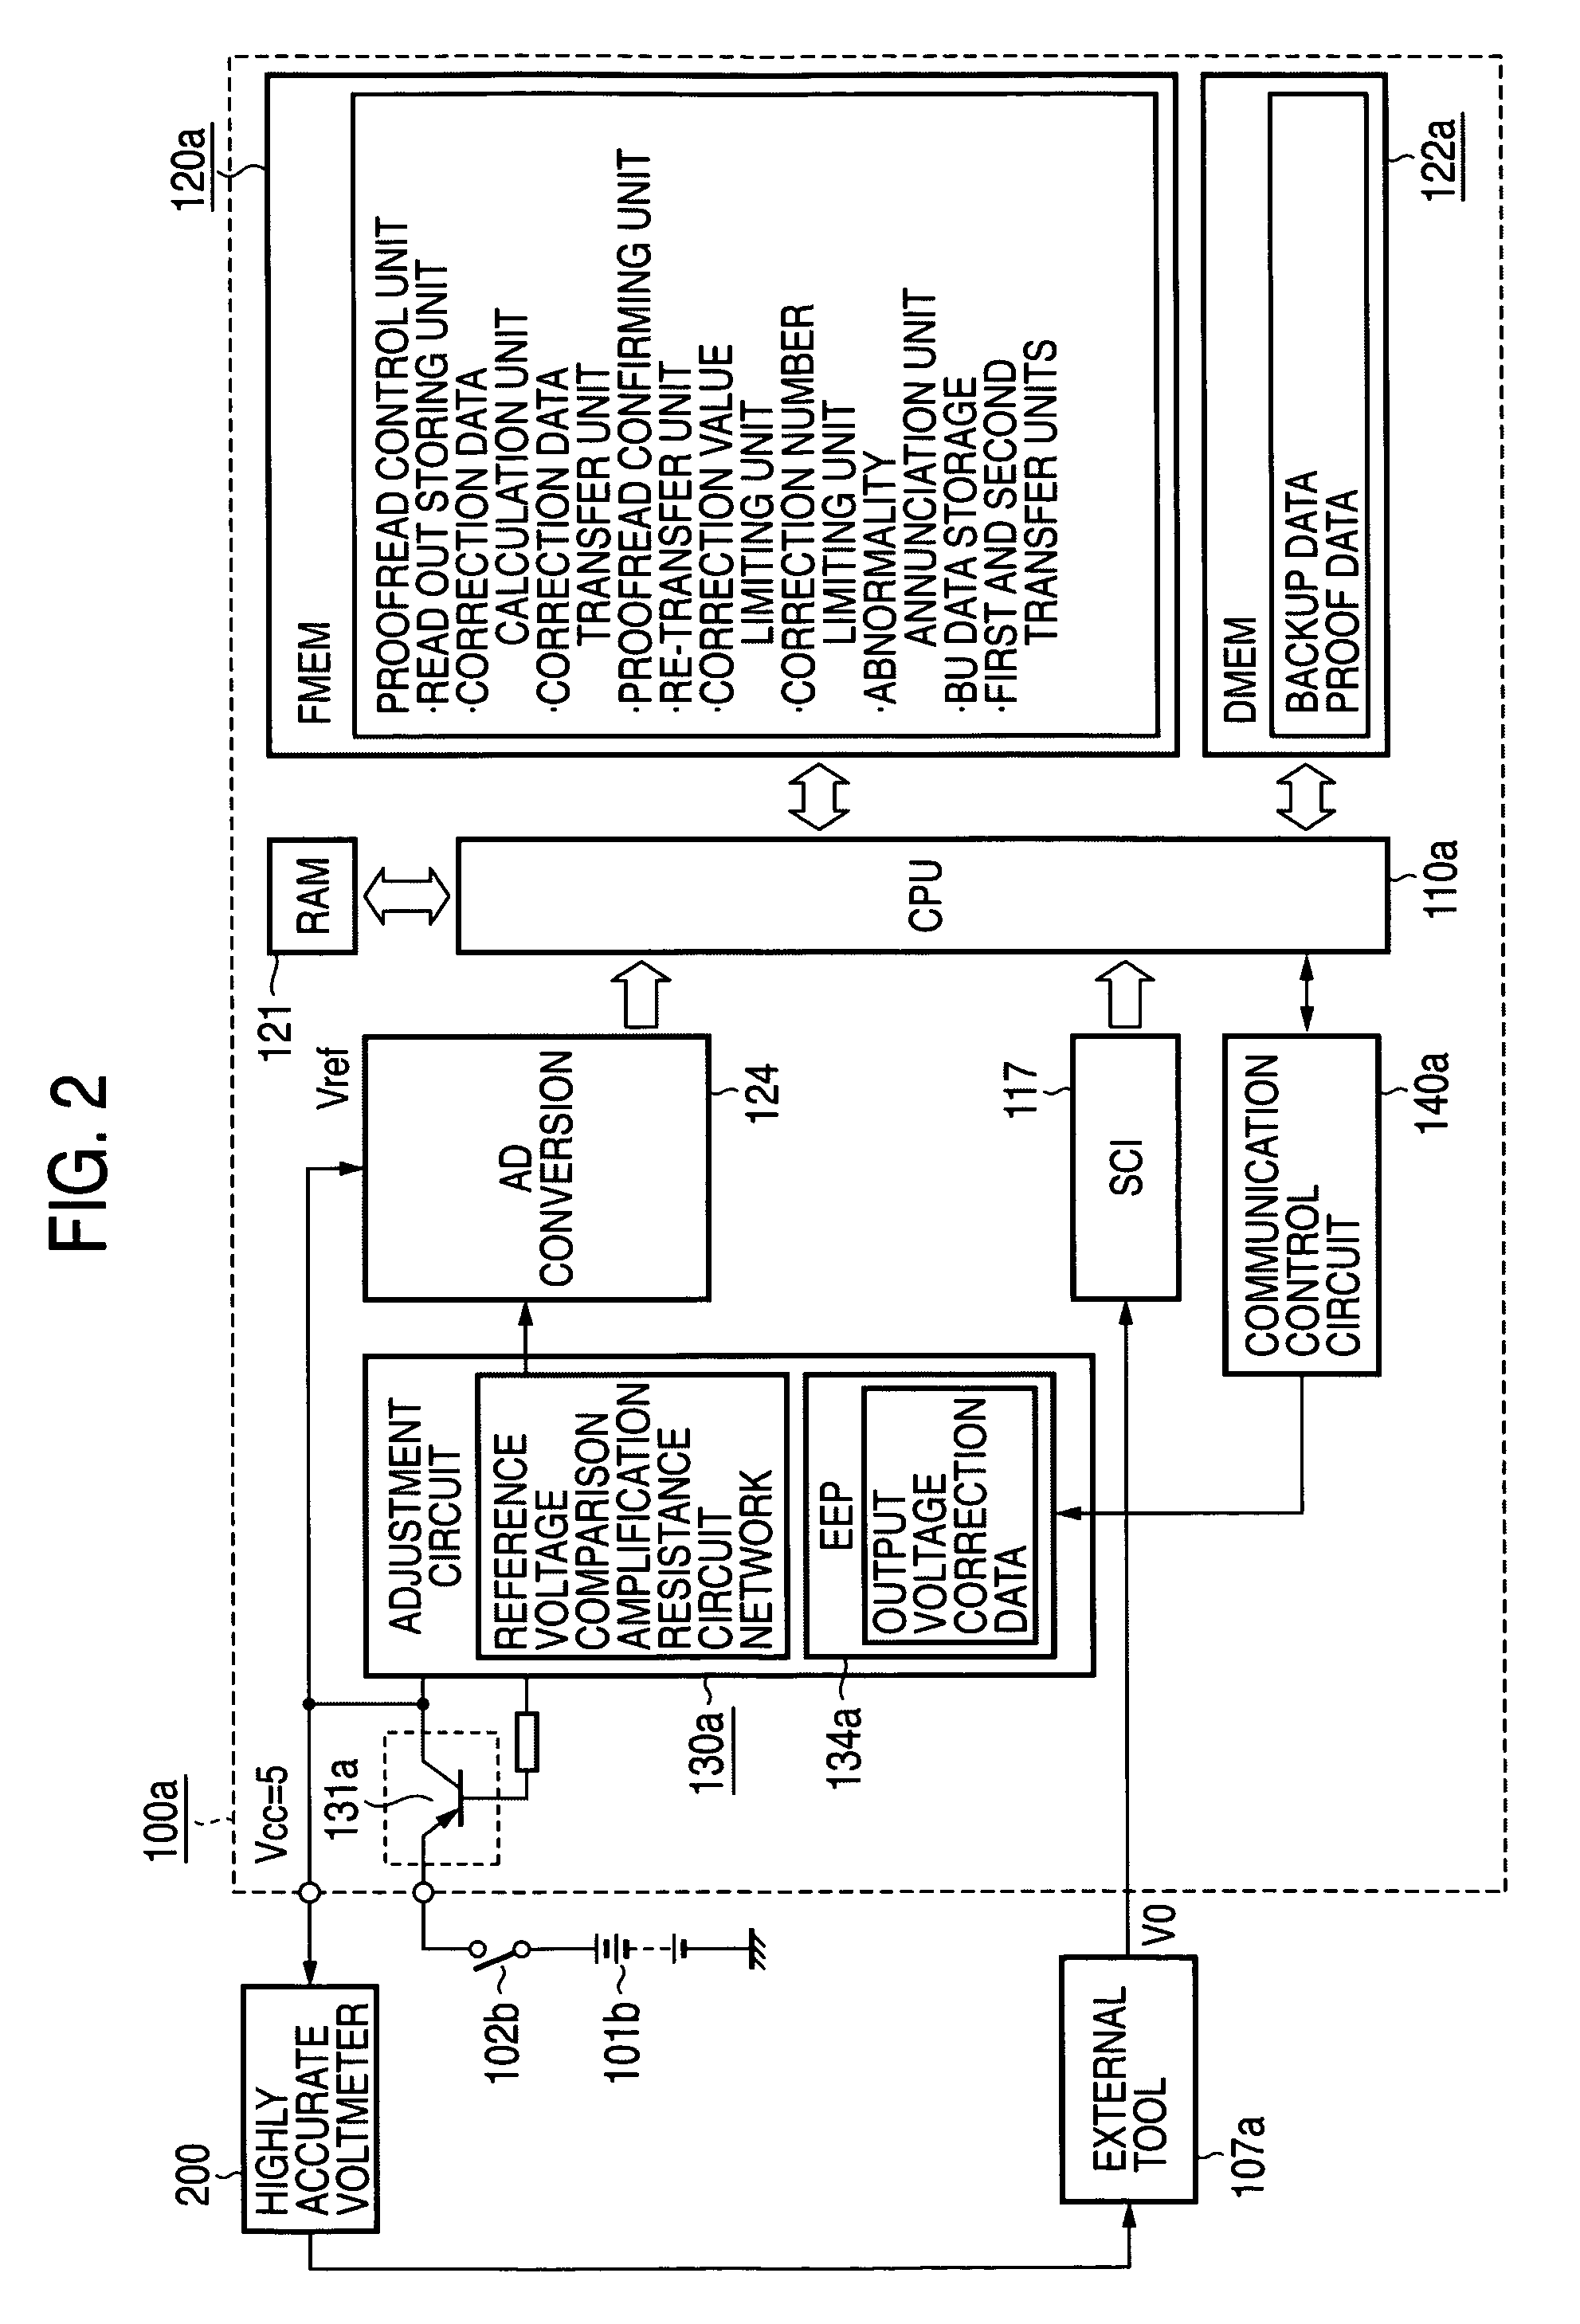 In-vehicle electronic control device